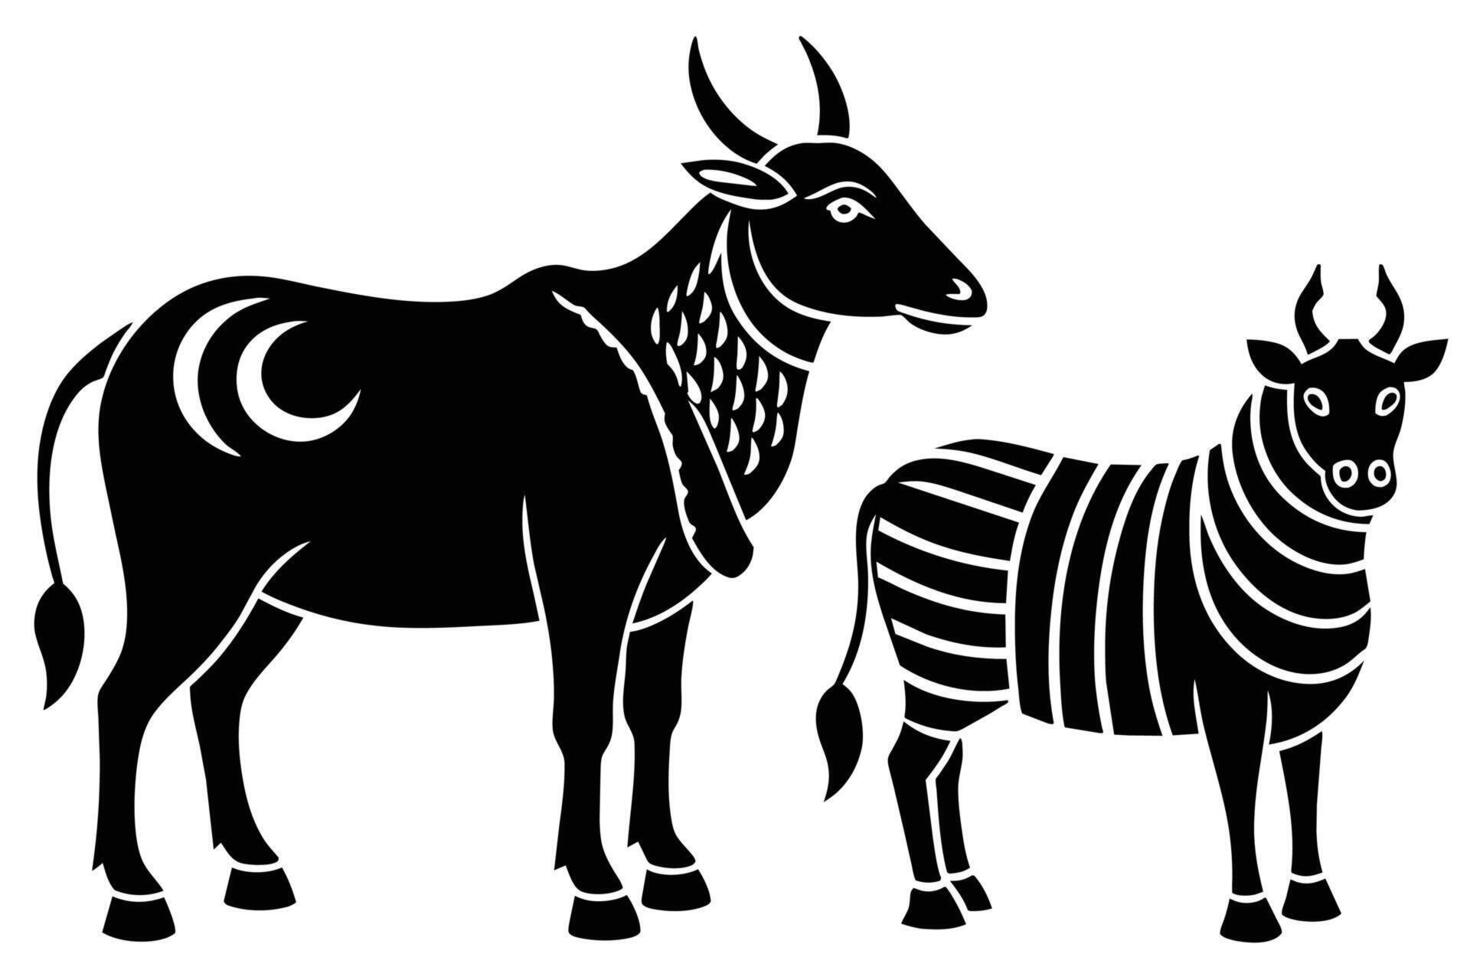 Sacrificial animals for Eid-ul-Azha Illustration Silhouetted on white background vector